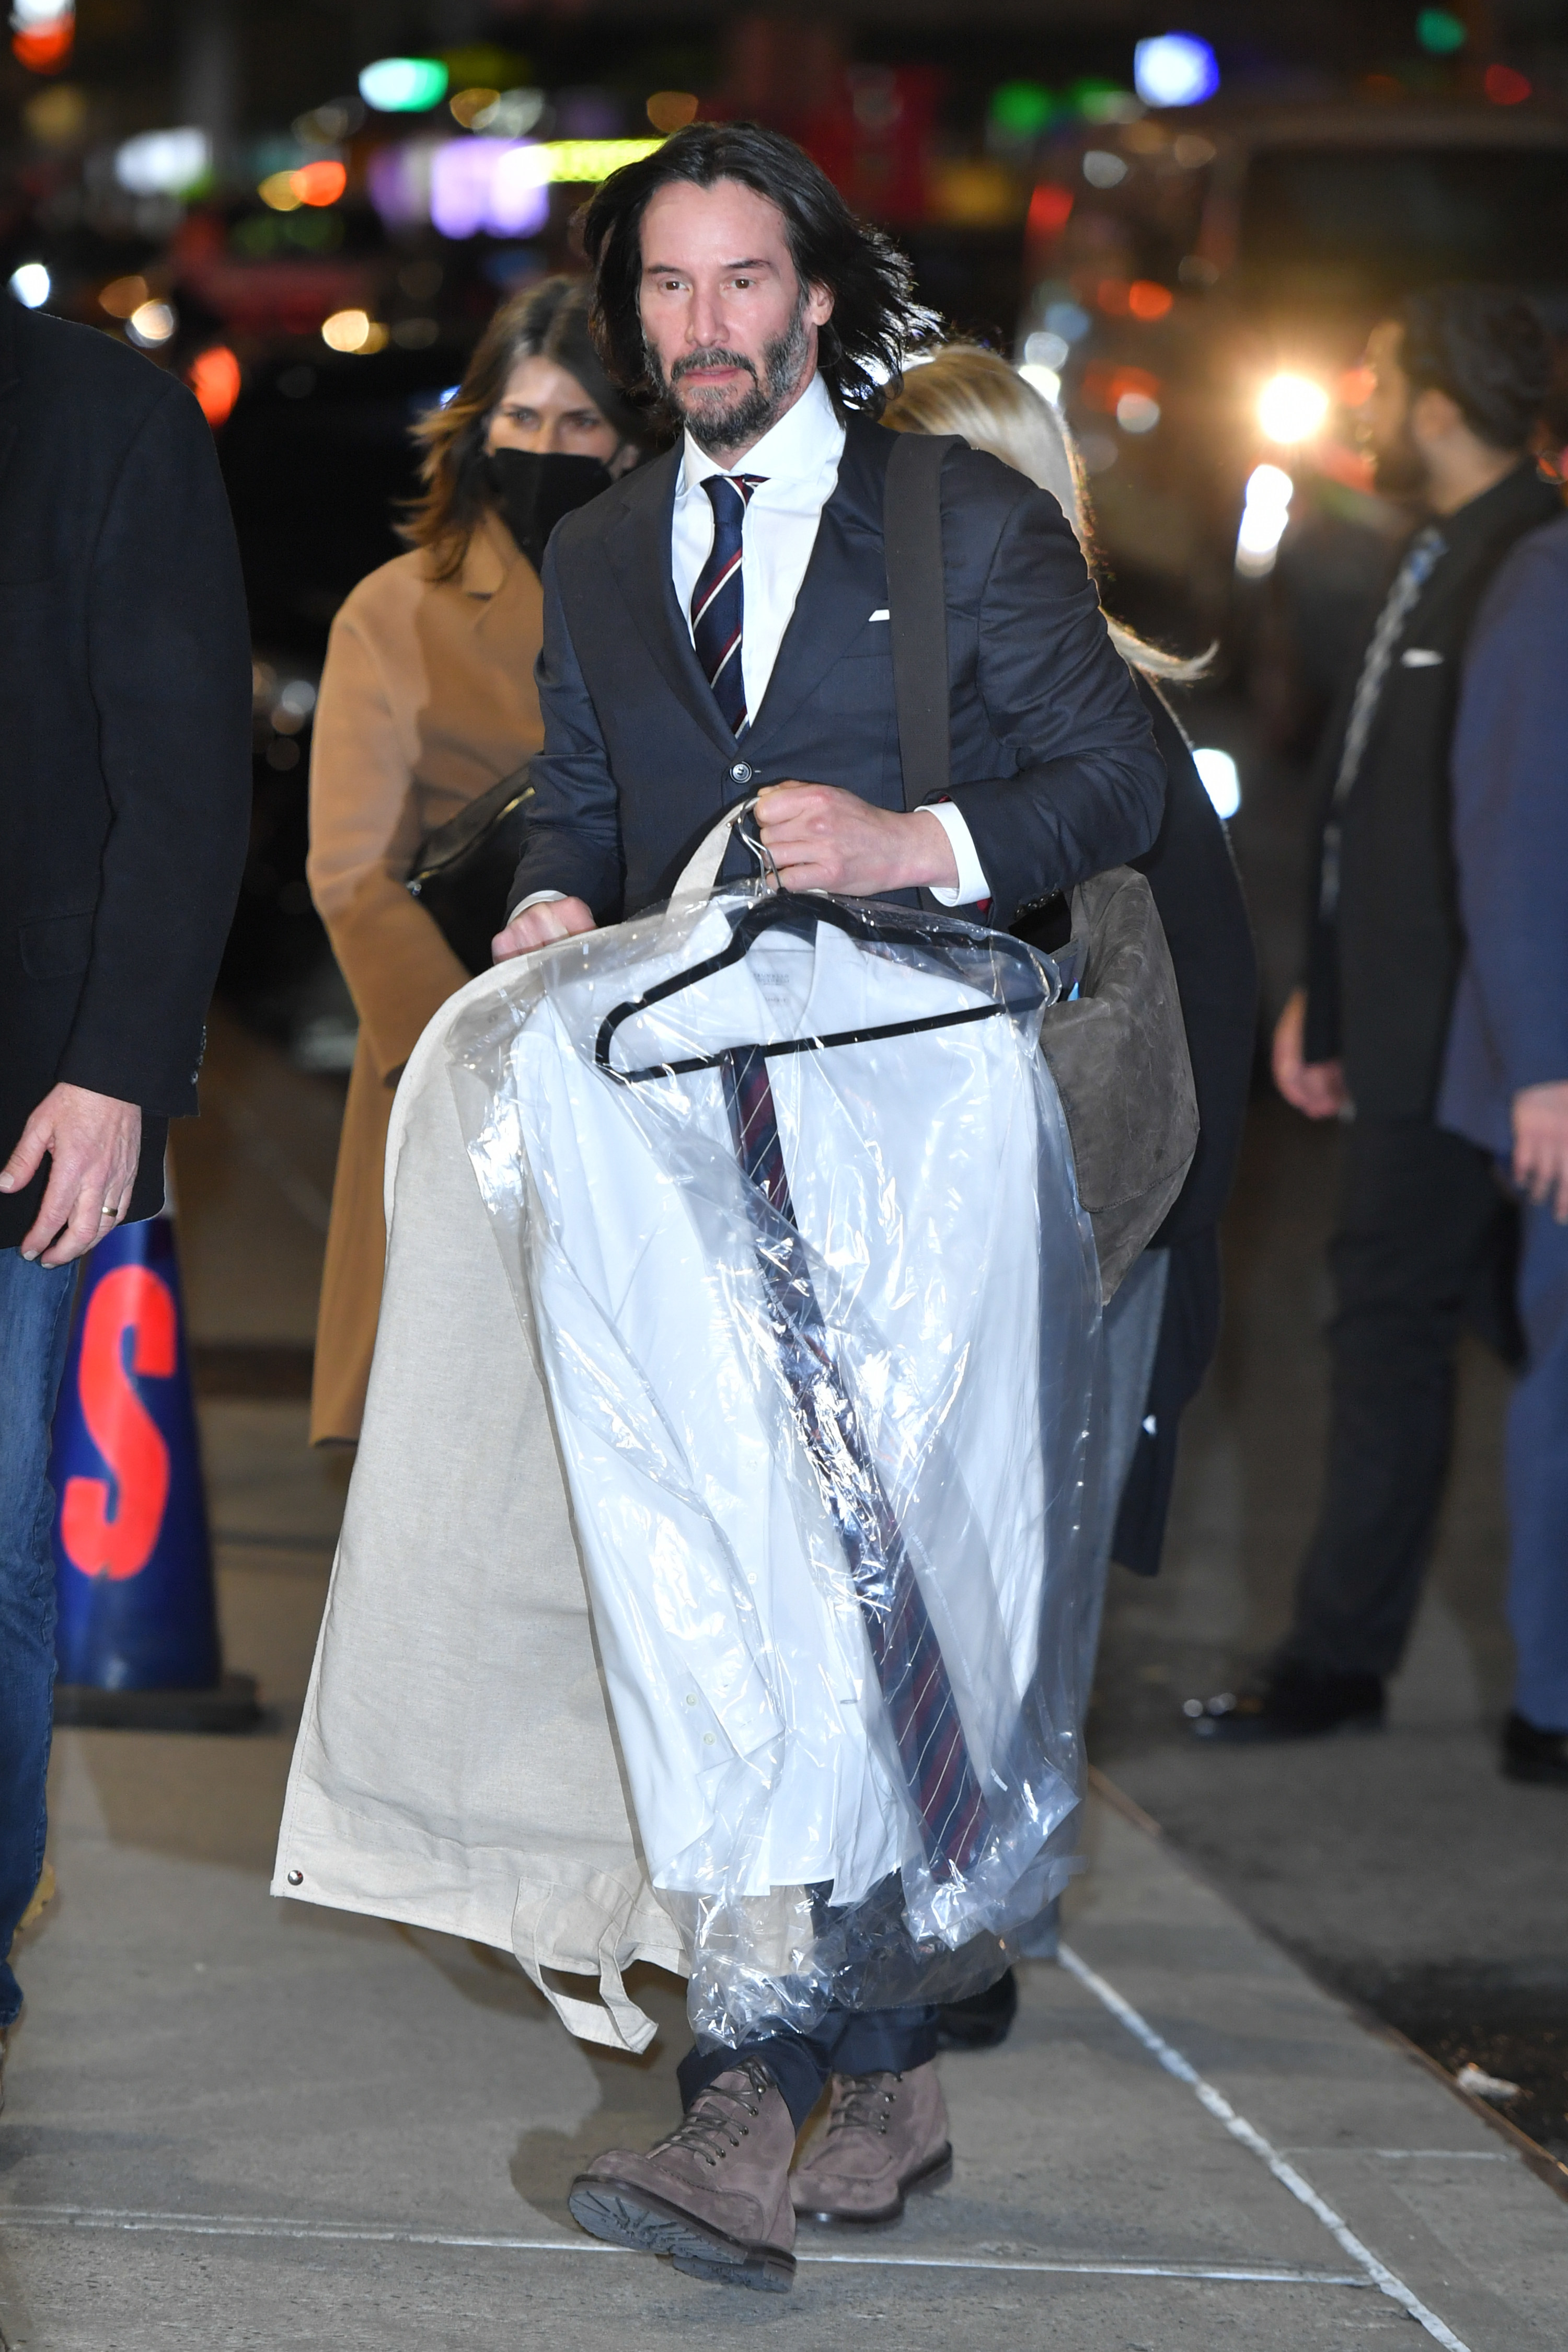 Reeves walks down the street with drycleaning